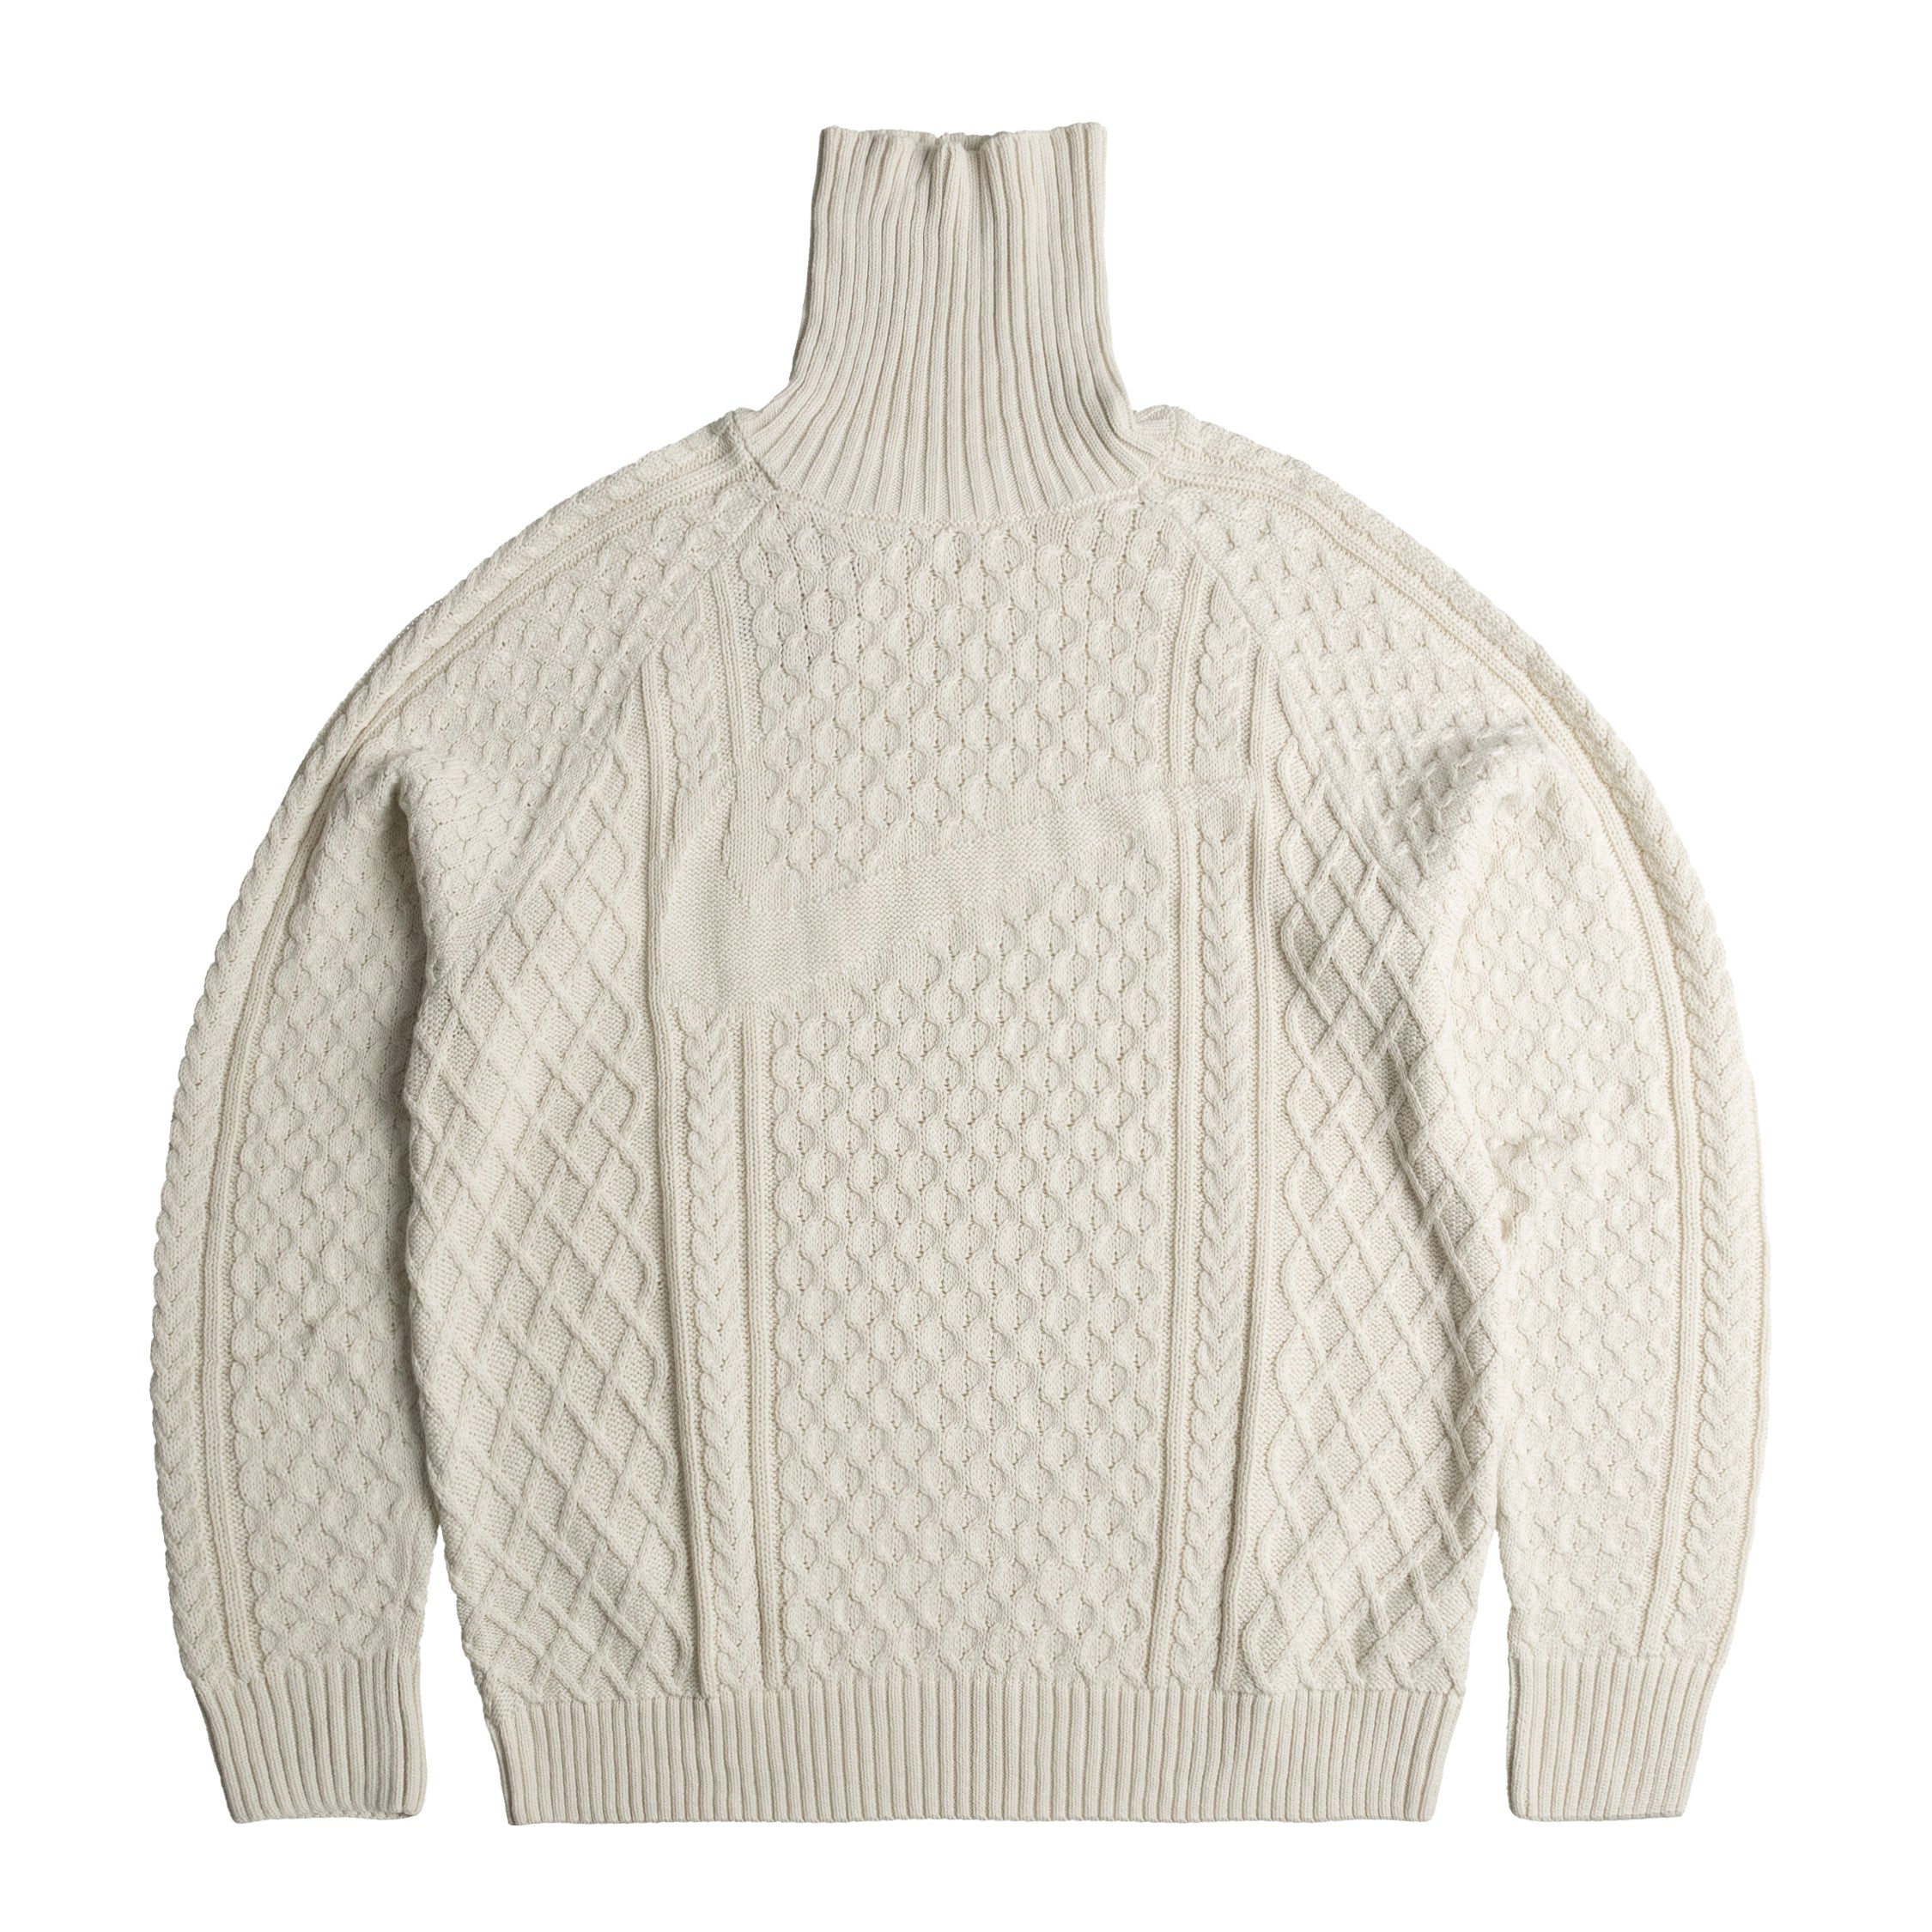 Nike Life Cable Knit Turtleneck – buy now at Asphaltgold Online Store!